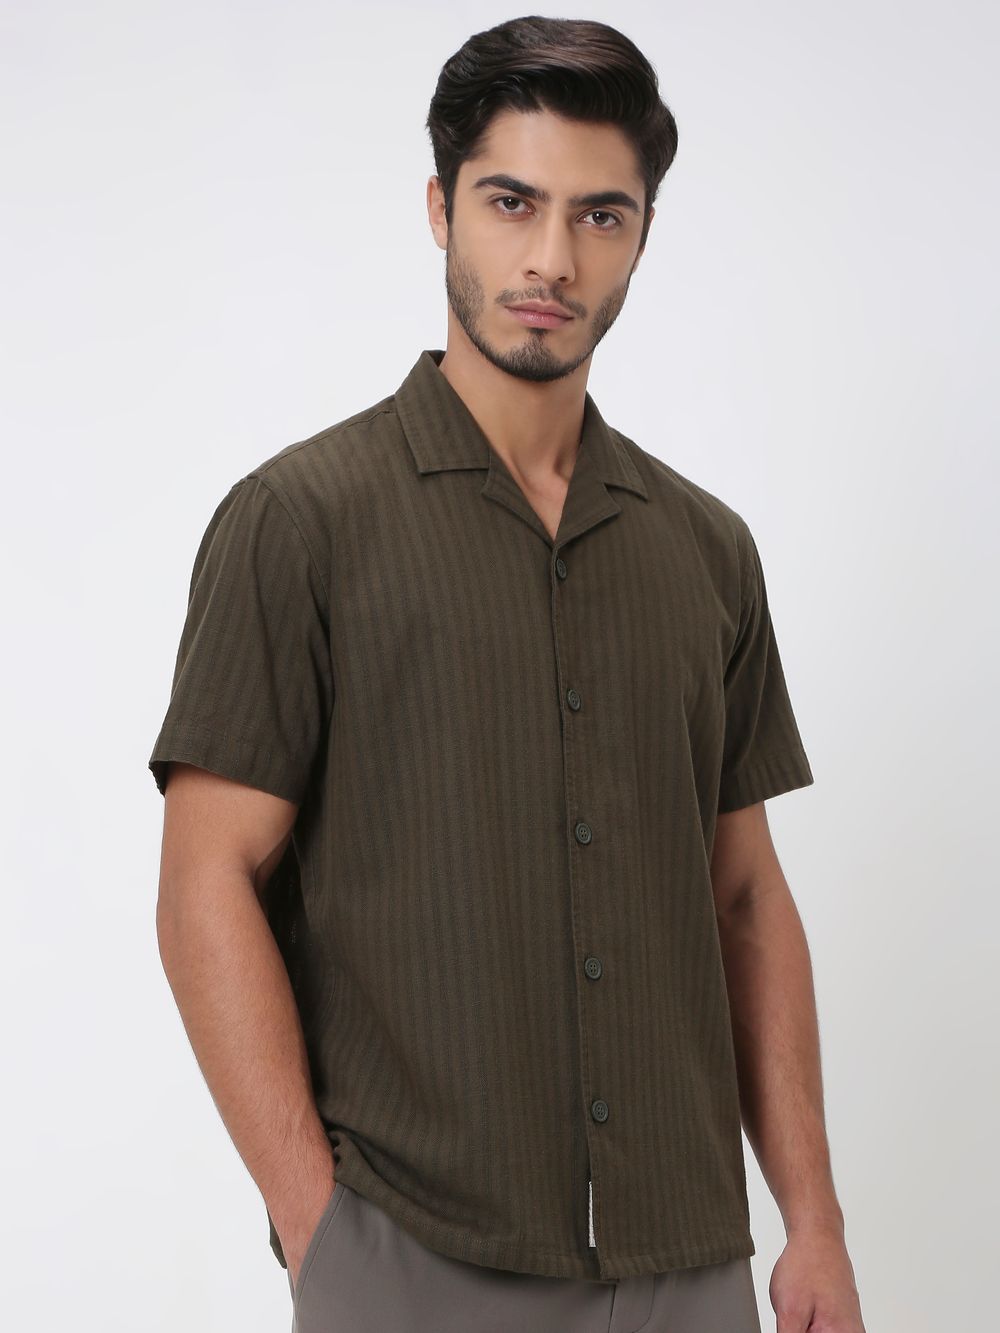 Olive Self-Stripe Plain Relaxed Fit Casual Shirt